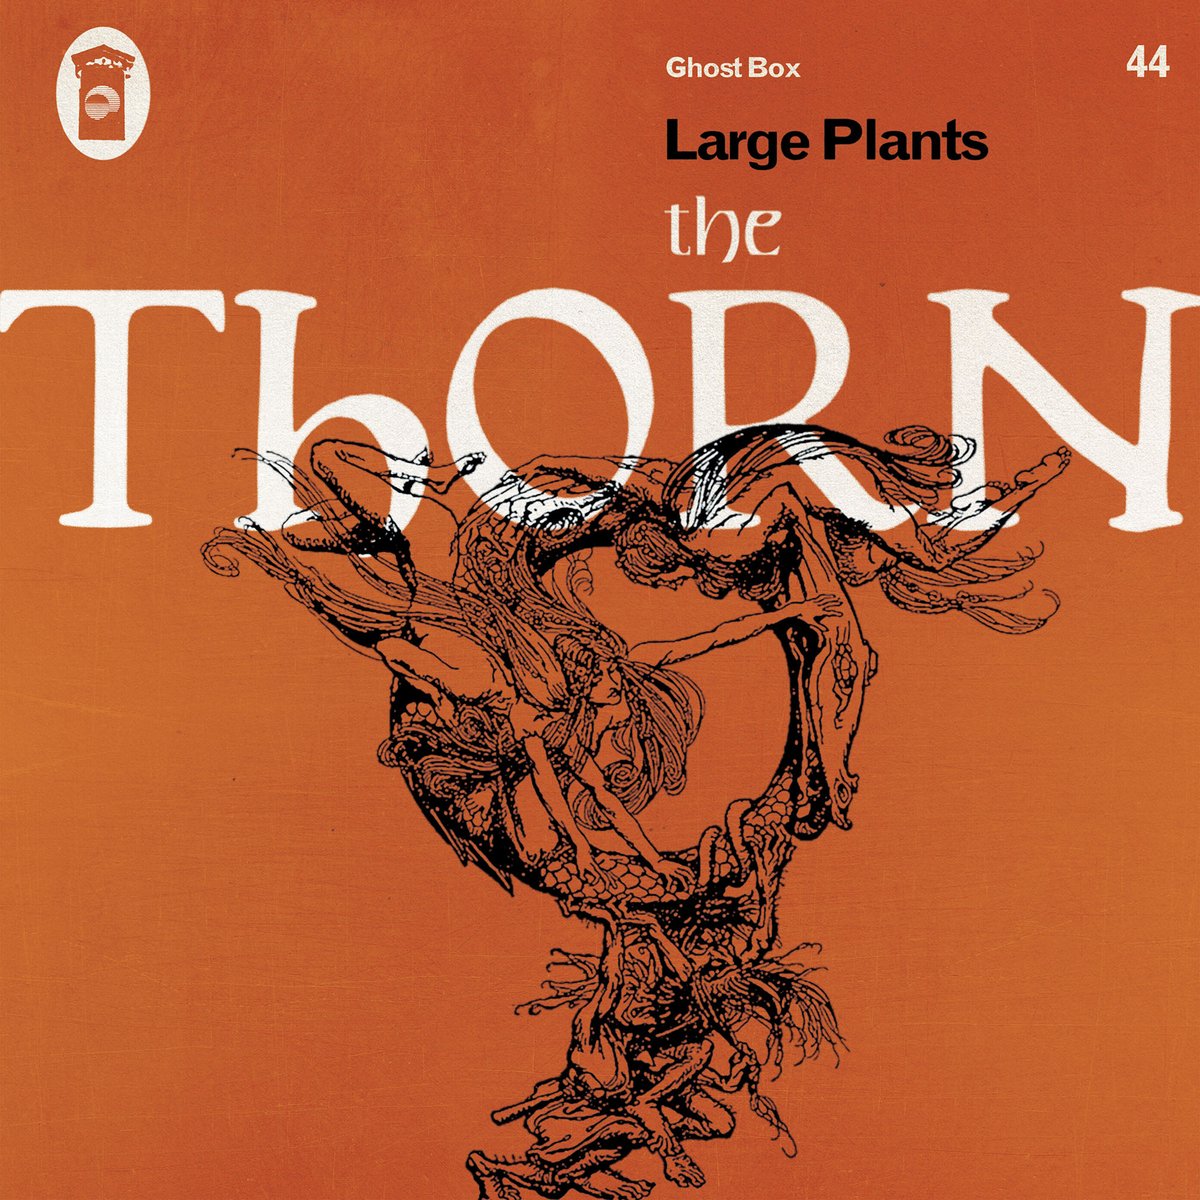 THE THORN by Large Plants is available to PRE-ORDER now, on LP & CD ghostbox.greedbag.com more info at ghostbox.co.uk #largeplantsband #vinyl #ghostboxrecords #cd #julianhouse #psychedelic #psychfolk #psychrock #plinytheelder #wolfpeople